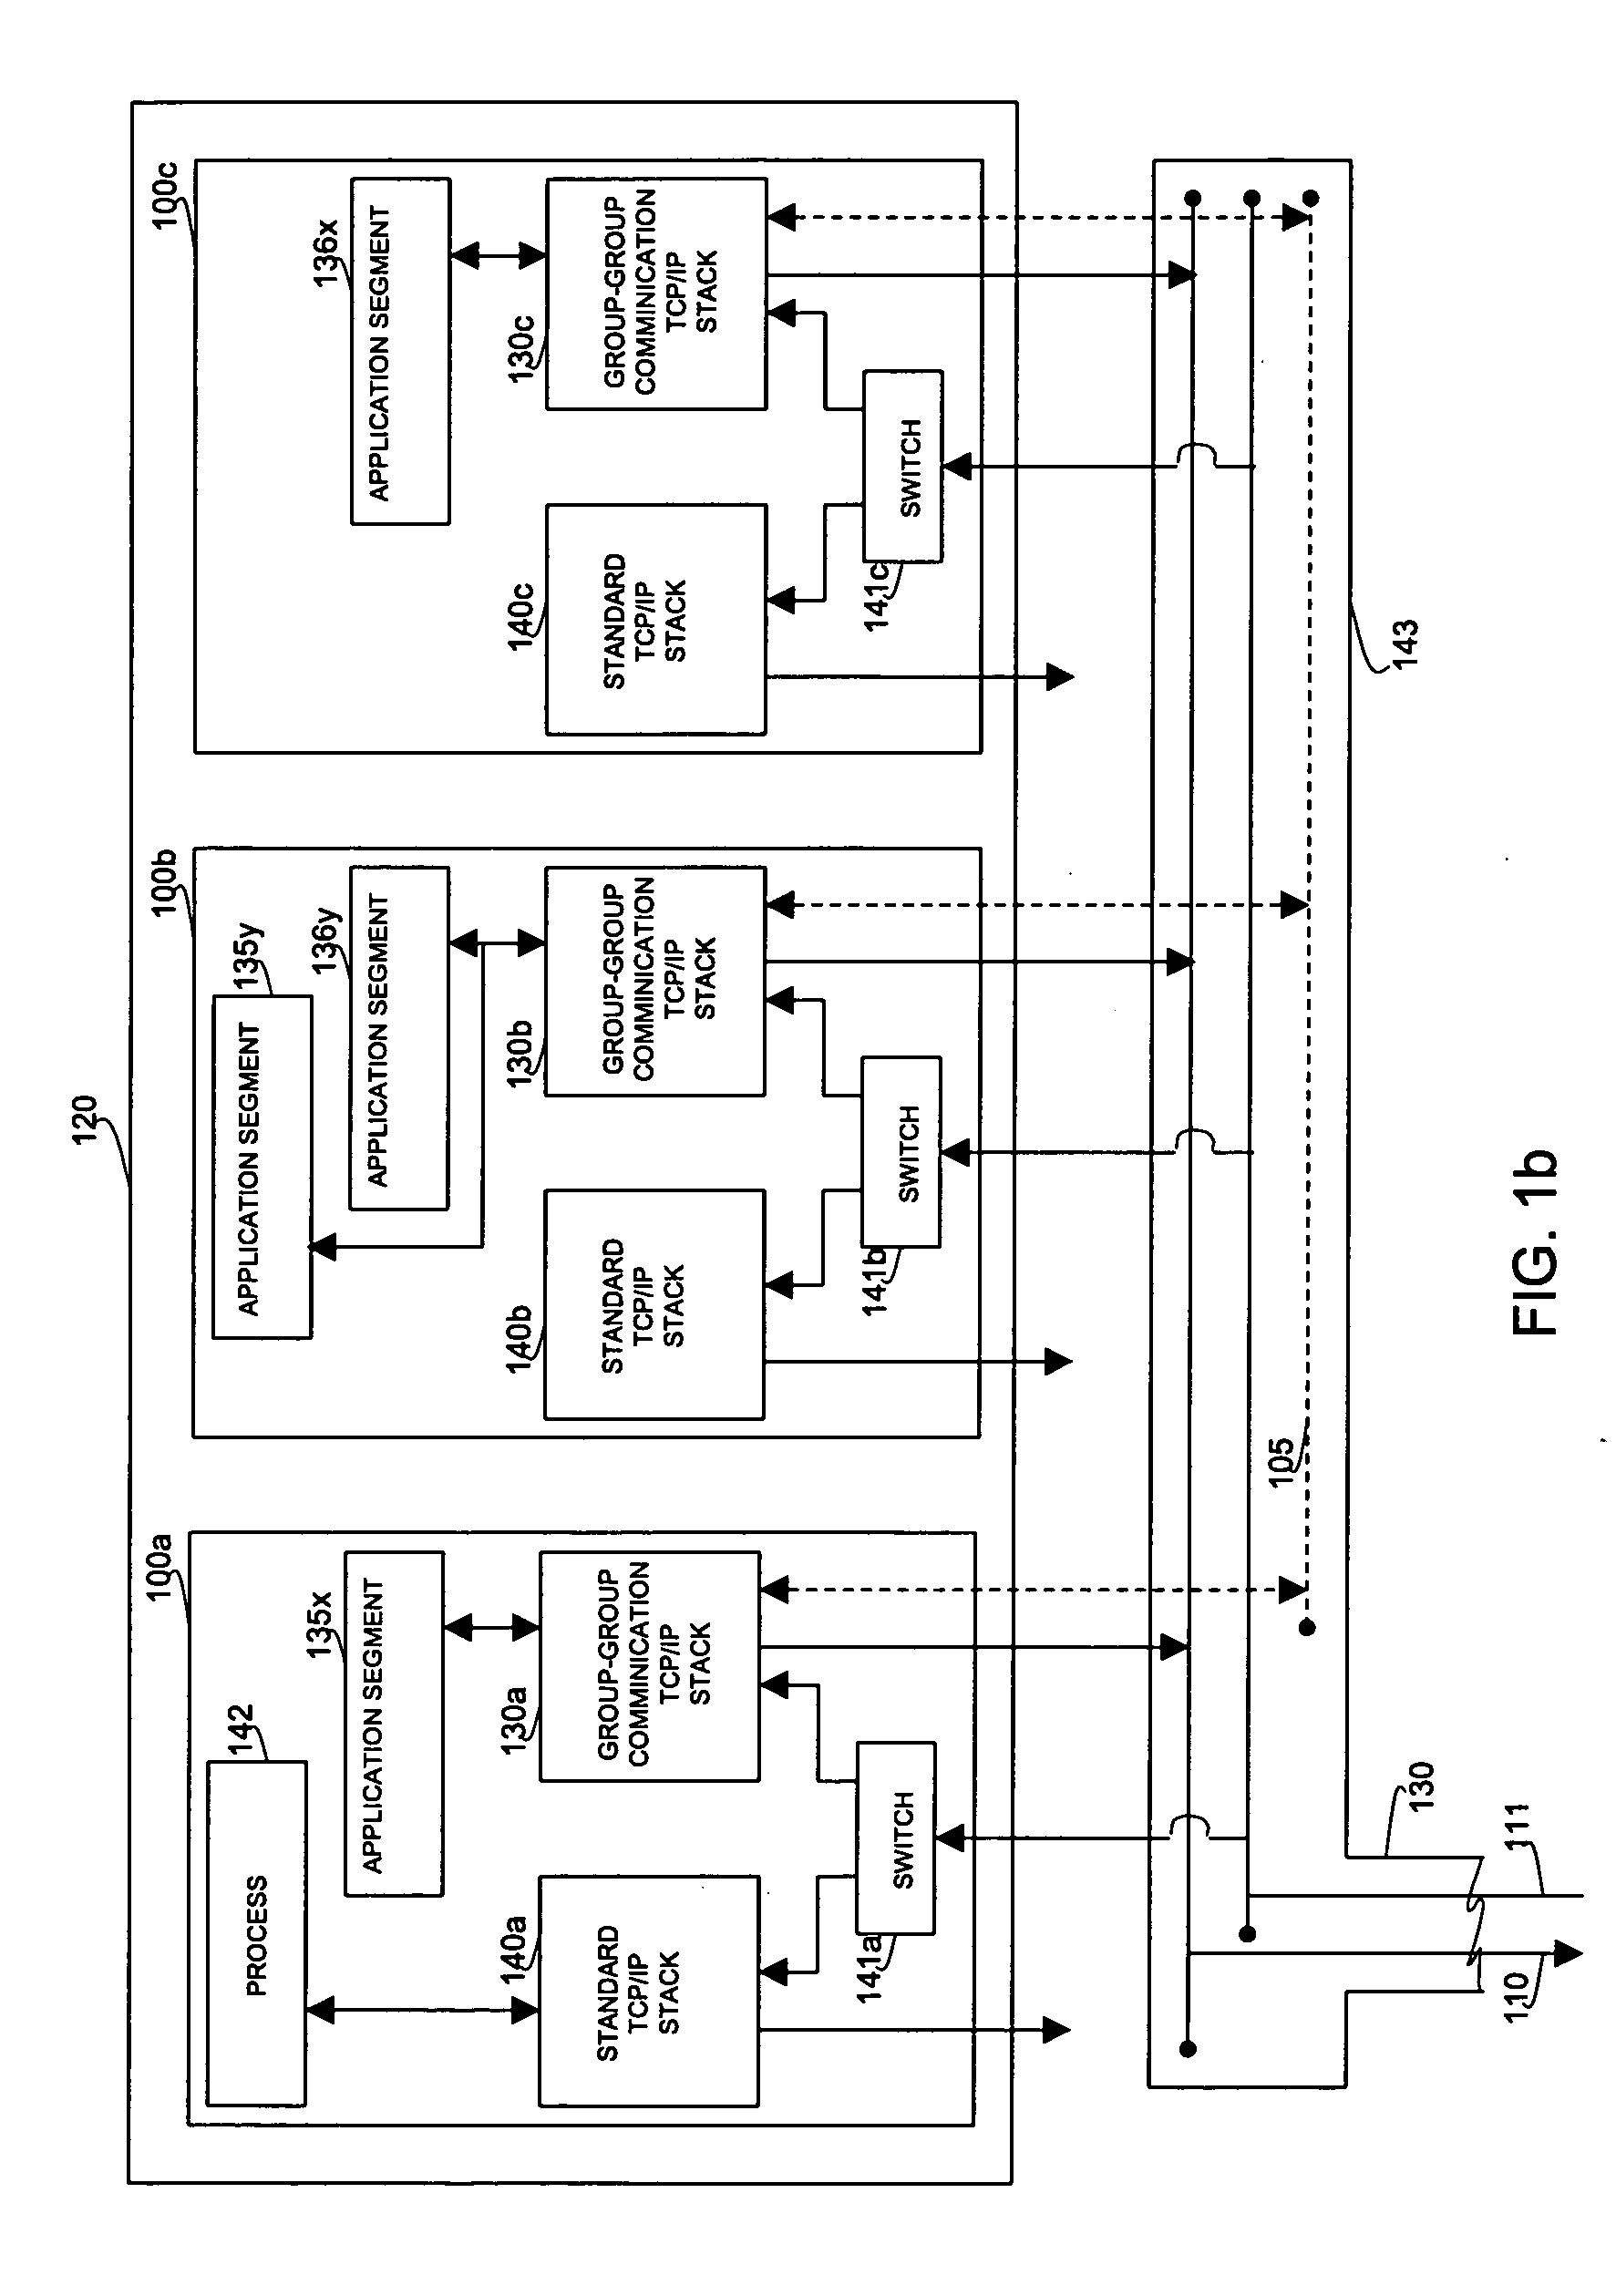 Group-to-group communication over a single connection